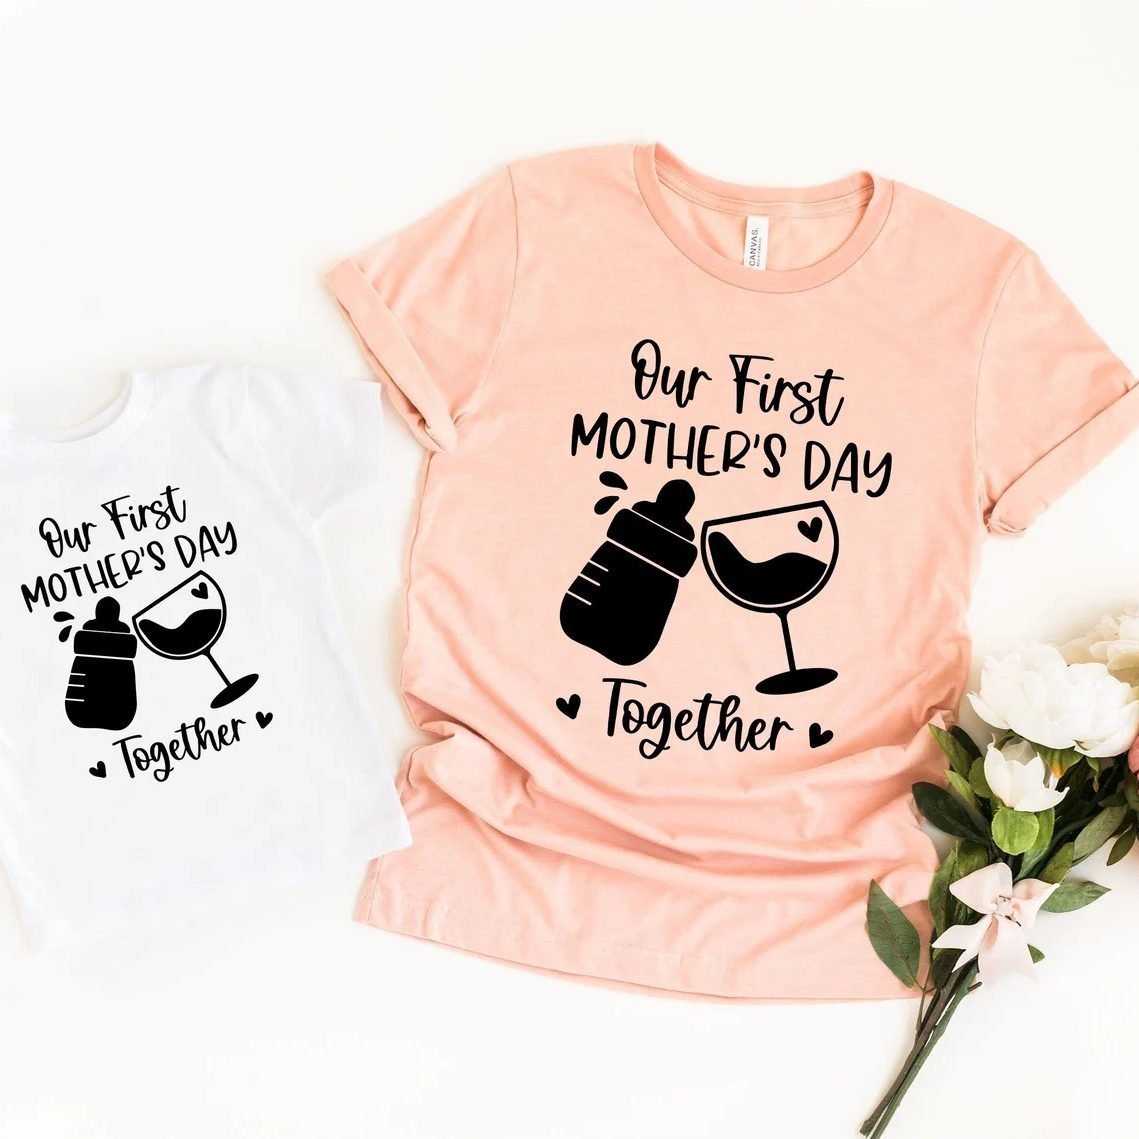 https://www.rd.com/wp-content/uploads/2022/04/our-first-mothers-day-together-matching-shirt-ecomm-via-etsy.com_-e1650990118611.jpg?fit=700%2C700